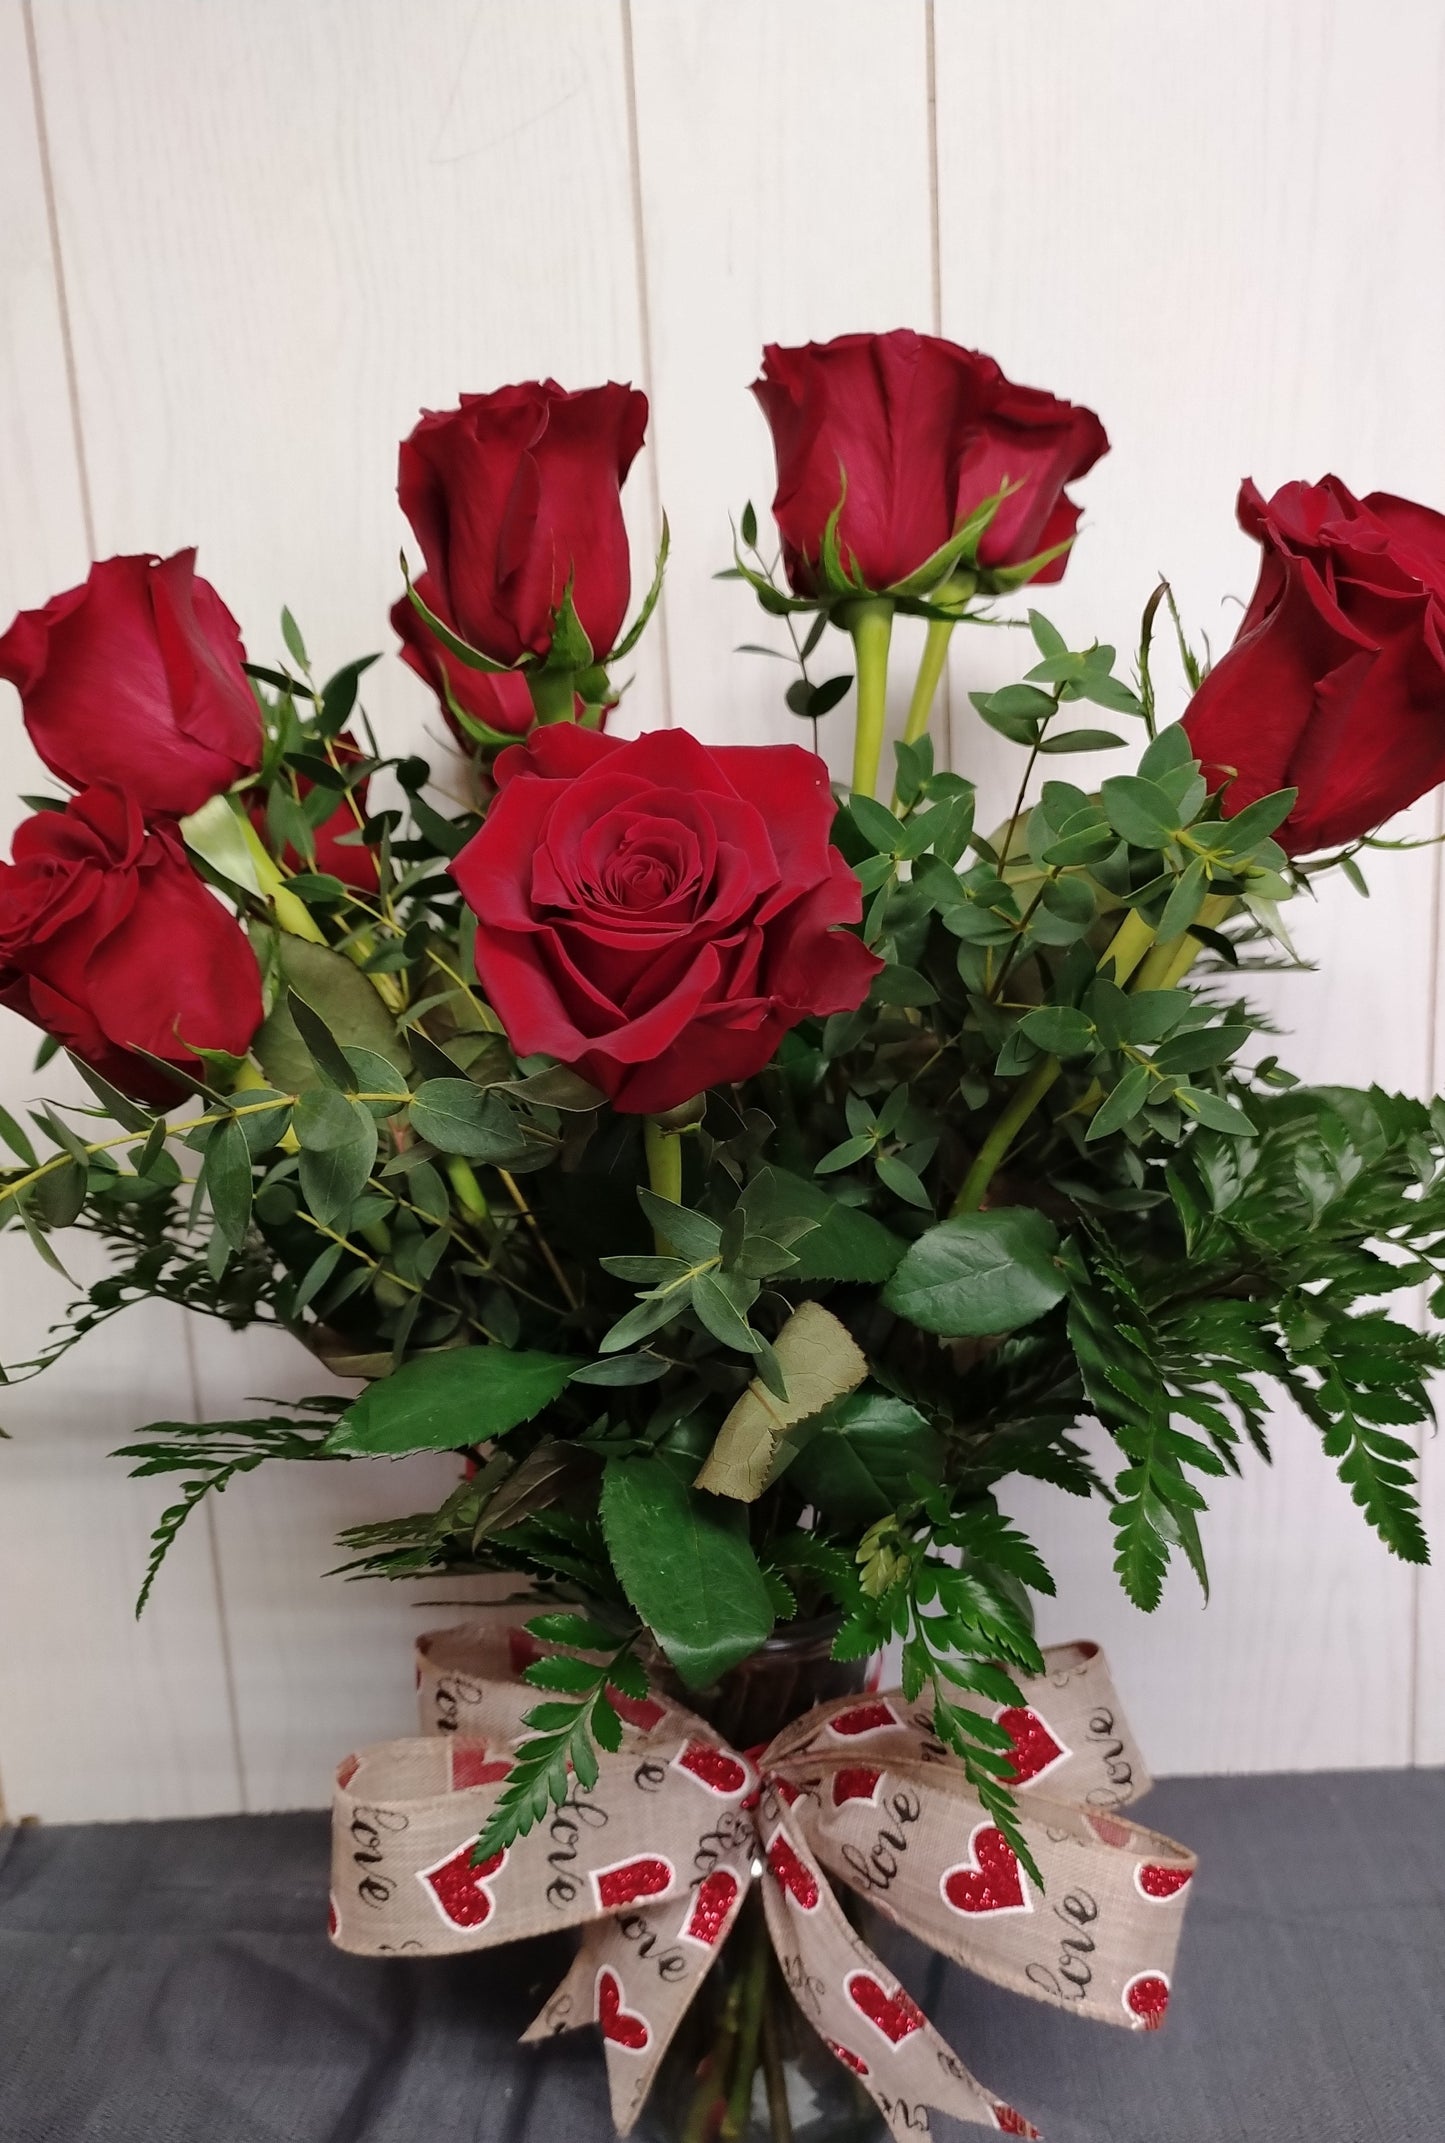 Simple Red Rose and Greens Vase